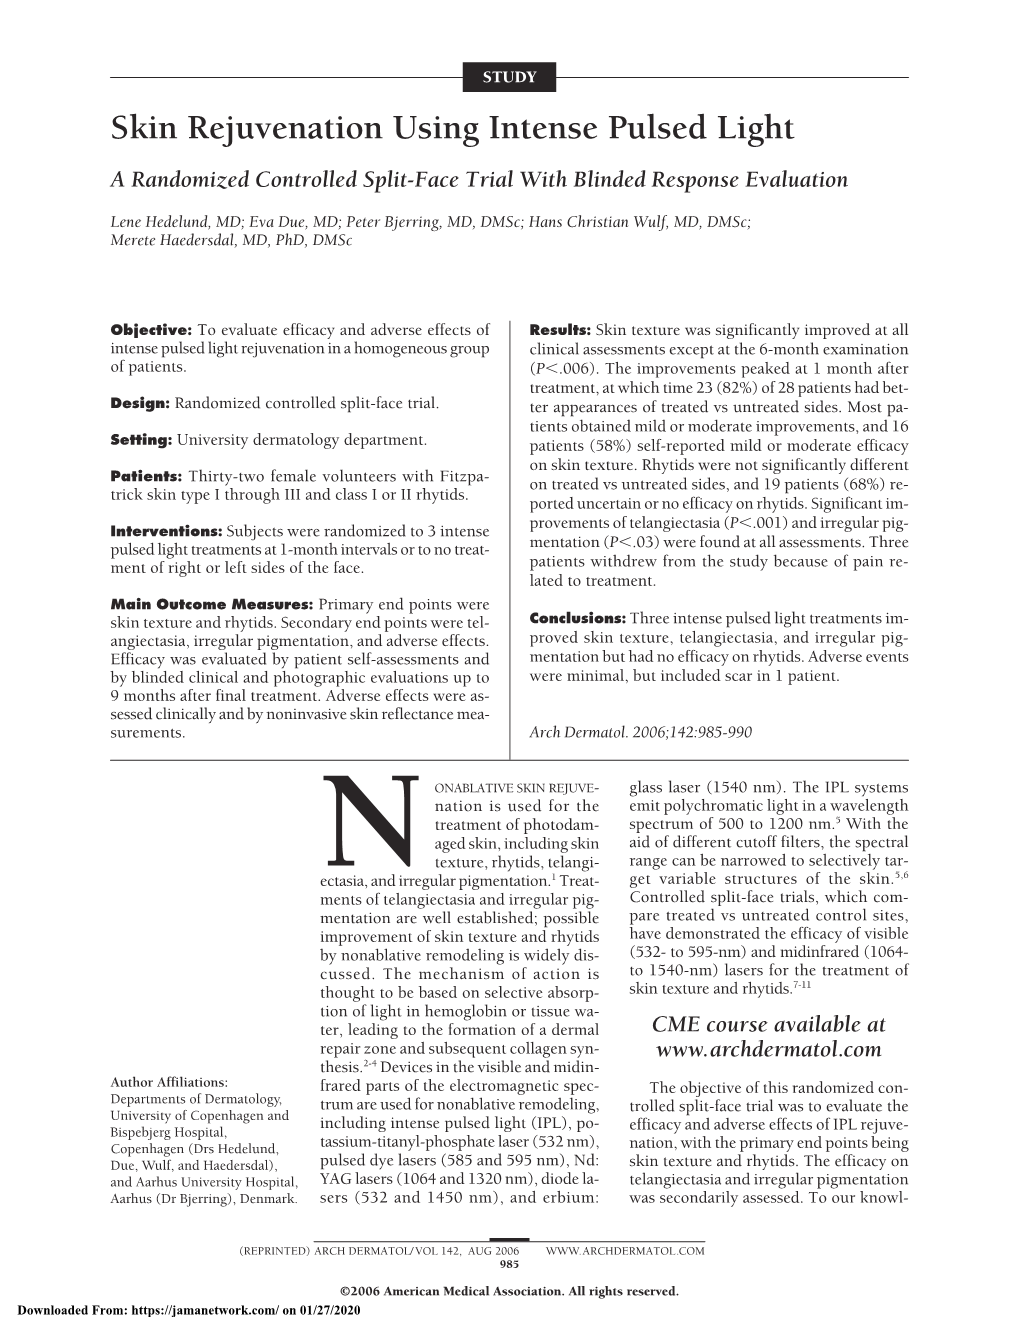 Skin Rejuvenation Using Intense Pulsed Light a Randomized Controlled Split-Face Trial with Blinded Response Evaluation